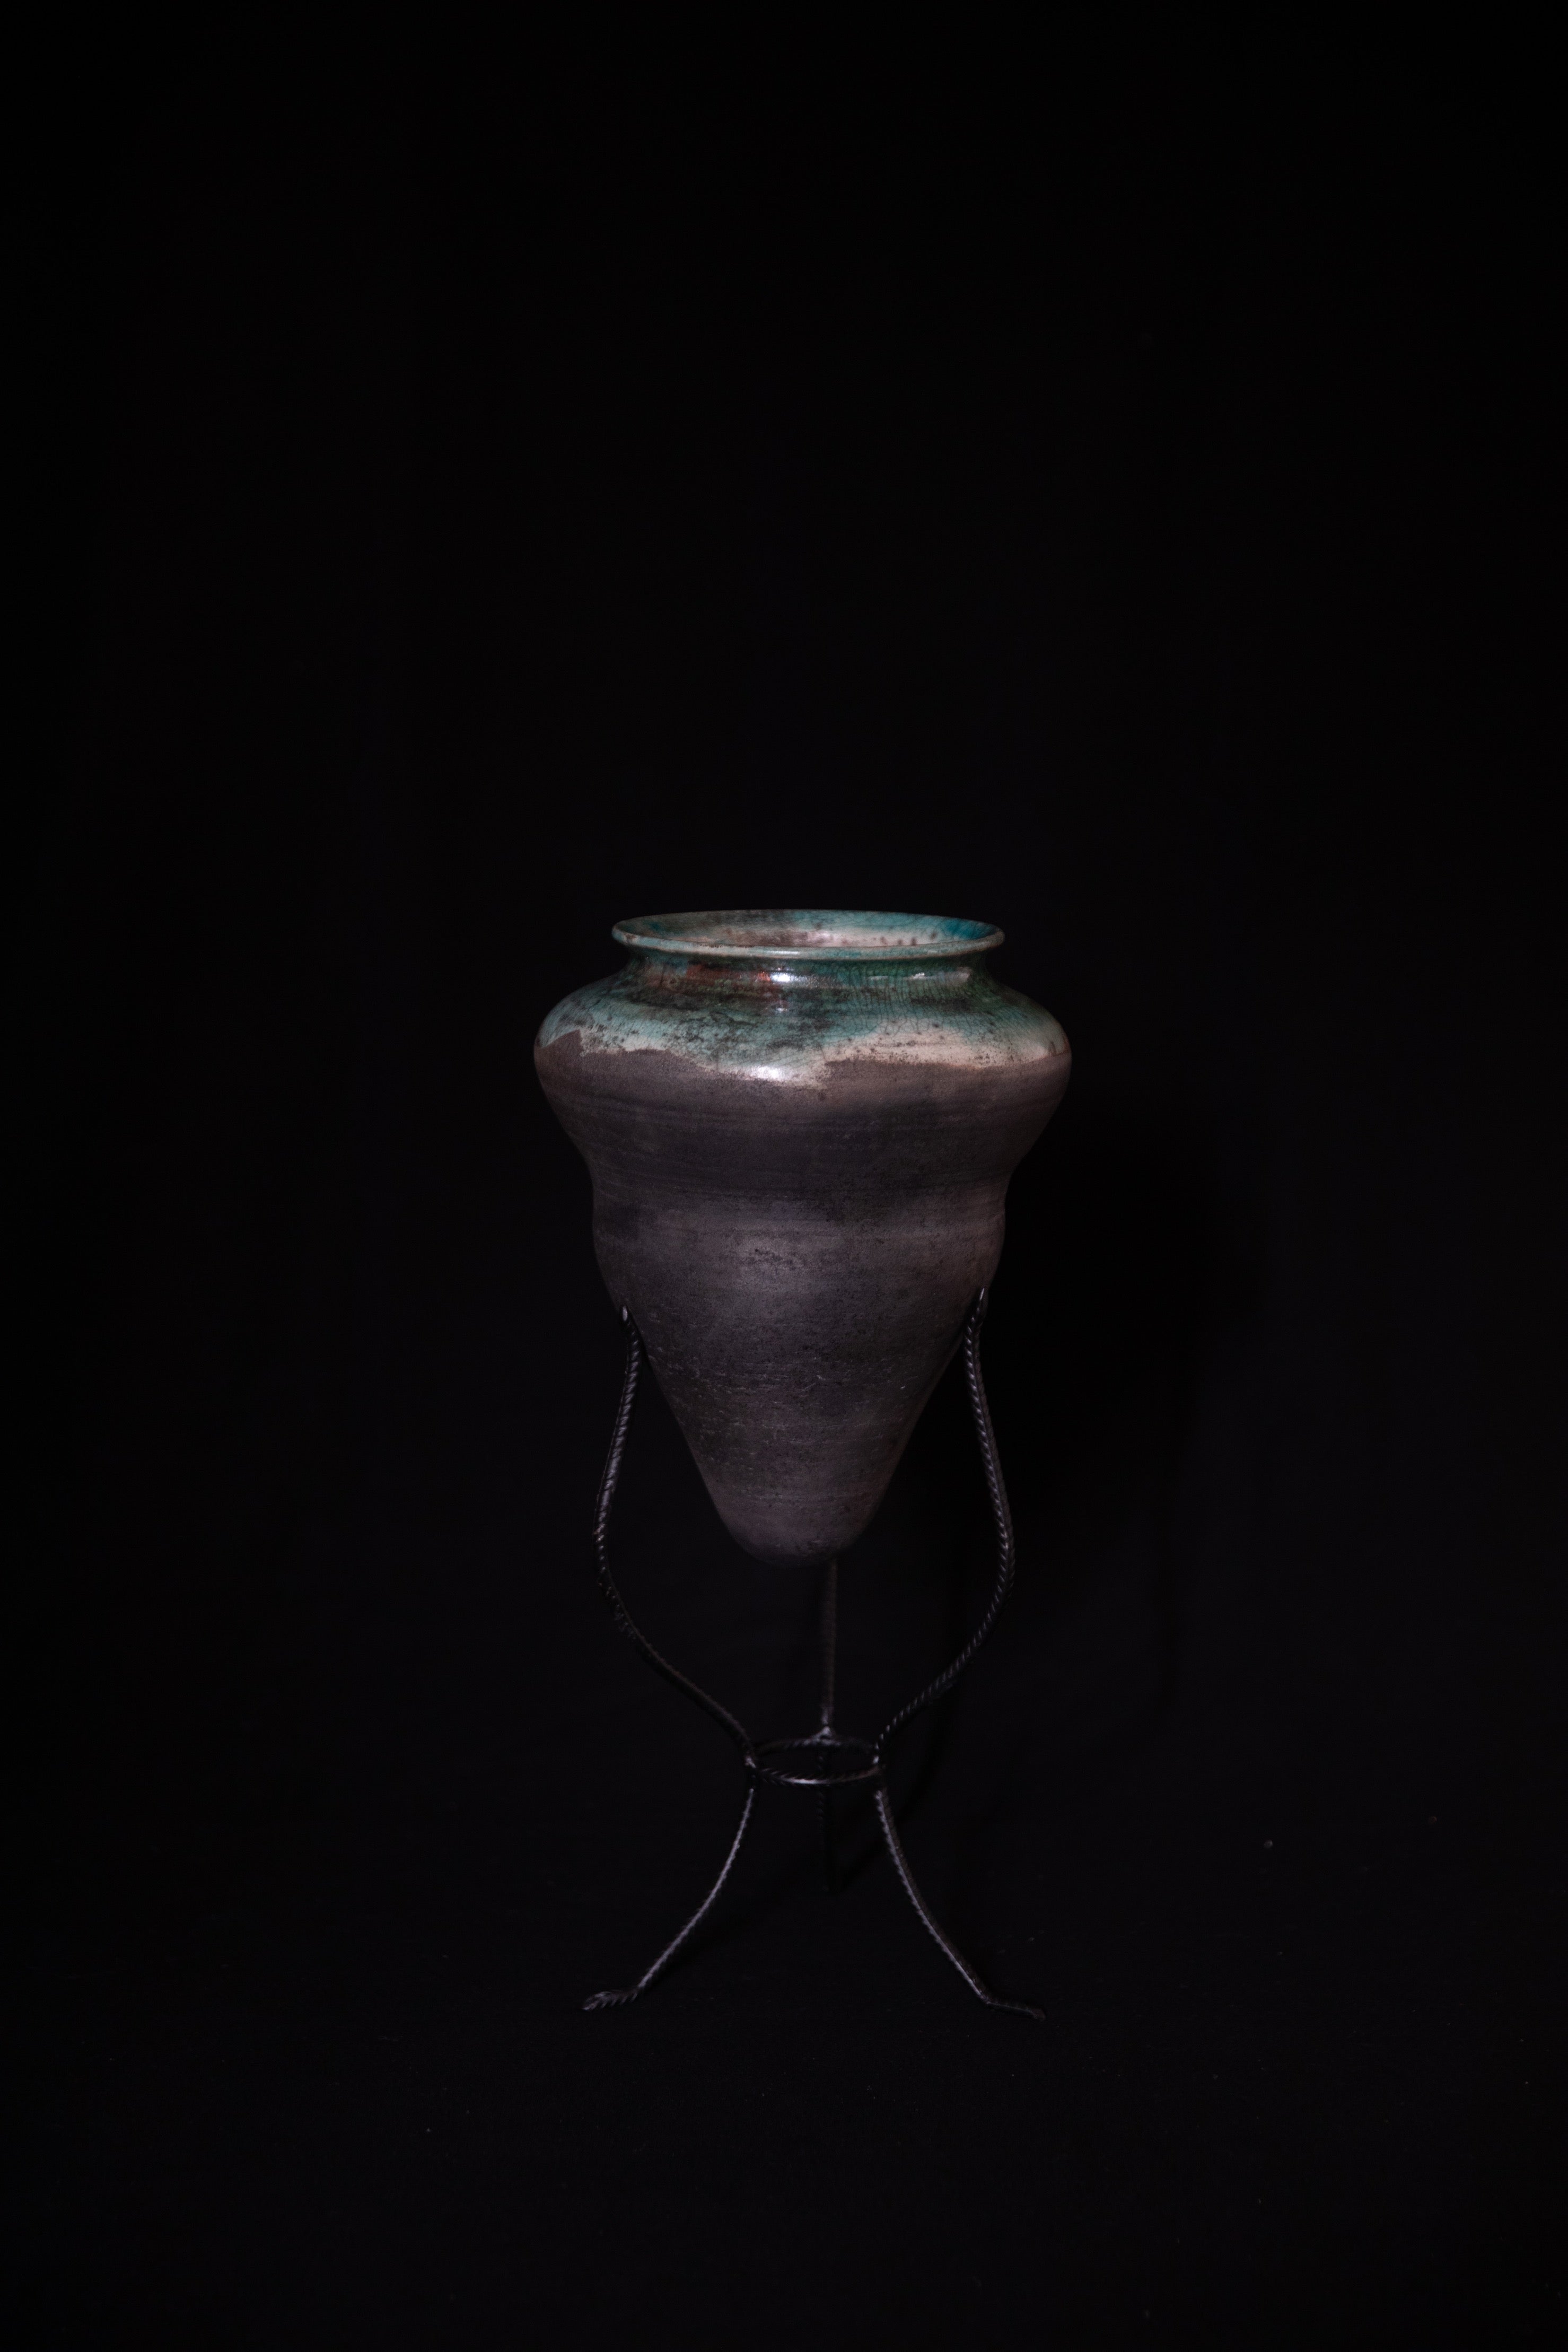 Ceramic Amphora Vase Handcrafted by Naiimpottery | Raku Fired Amphora Pointed Vase in a Unique Metal Stand